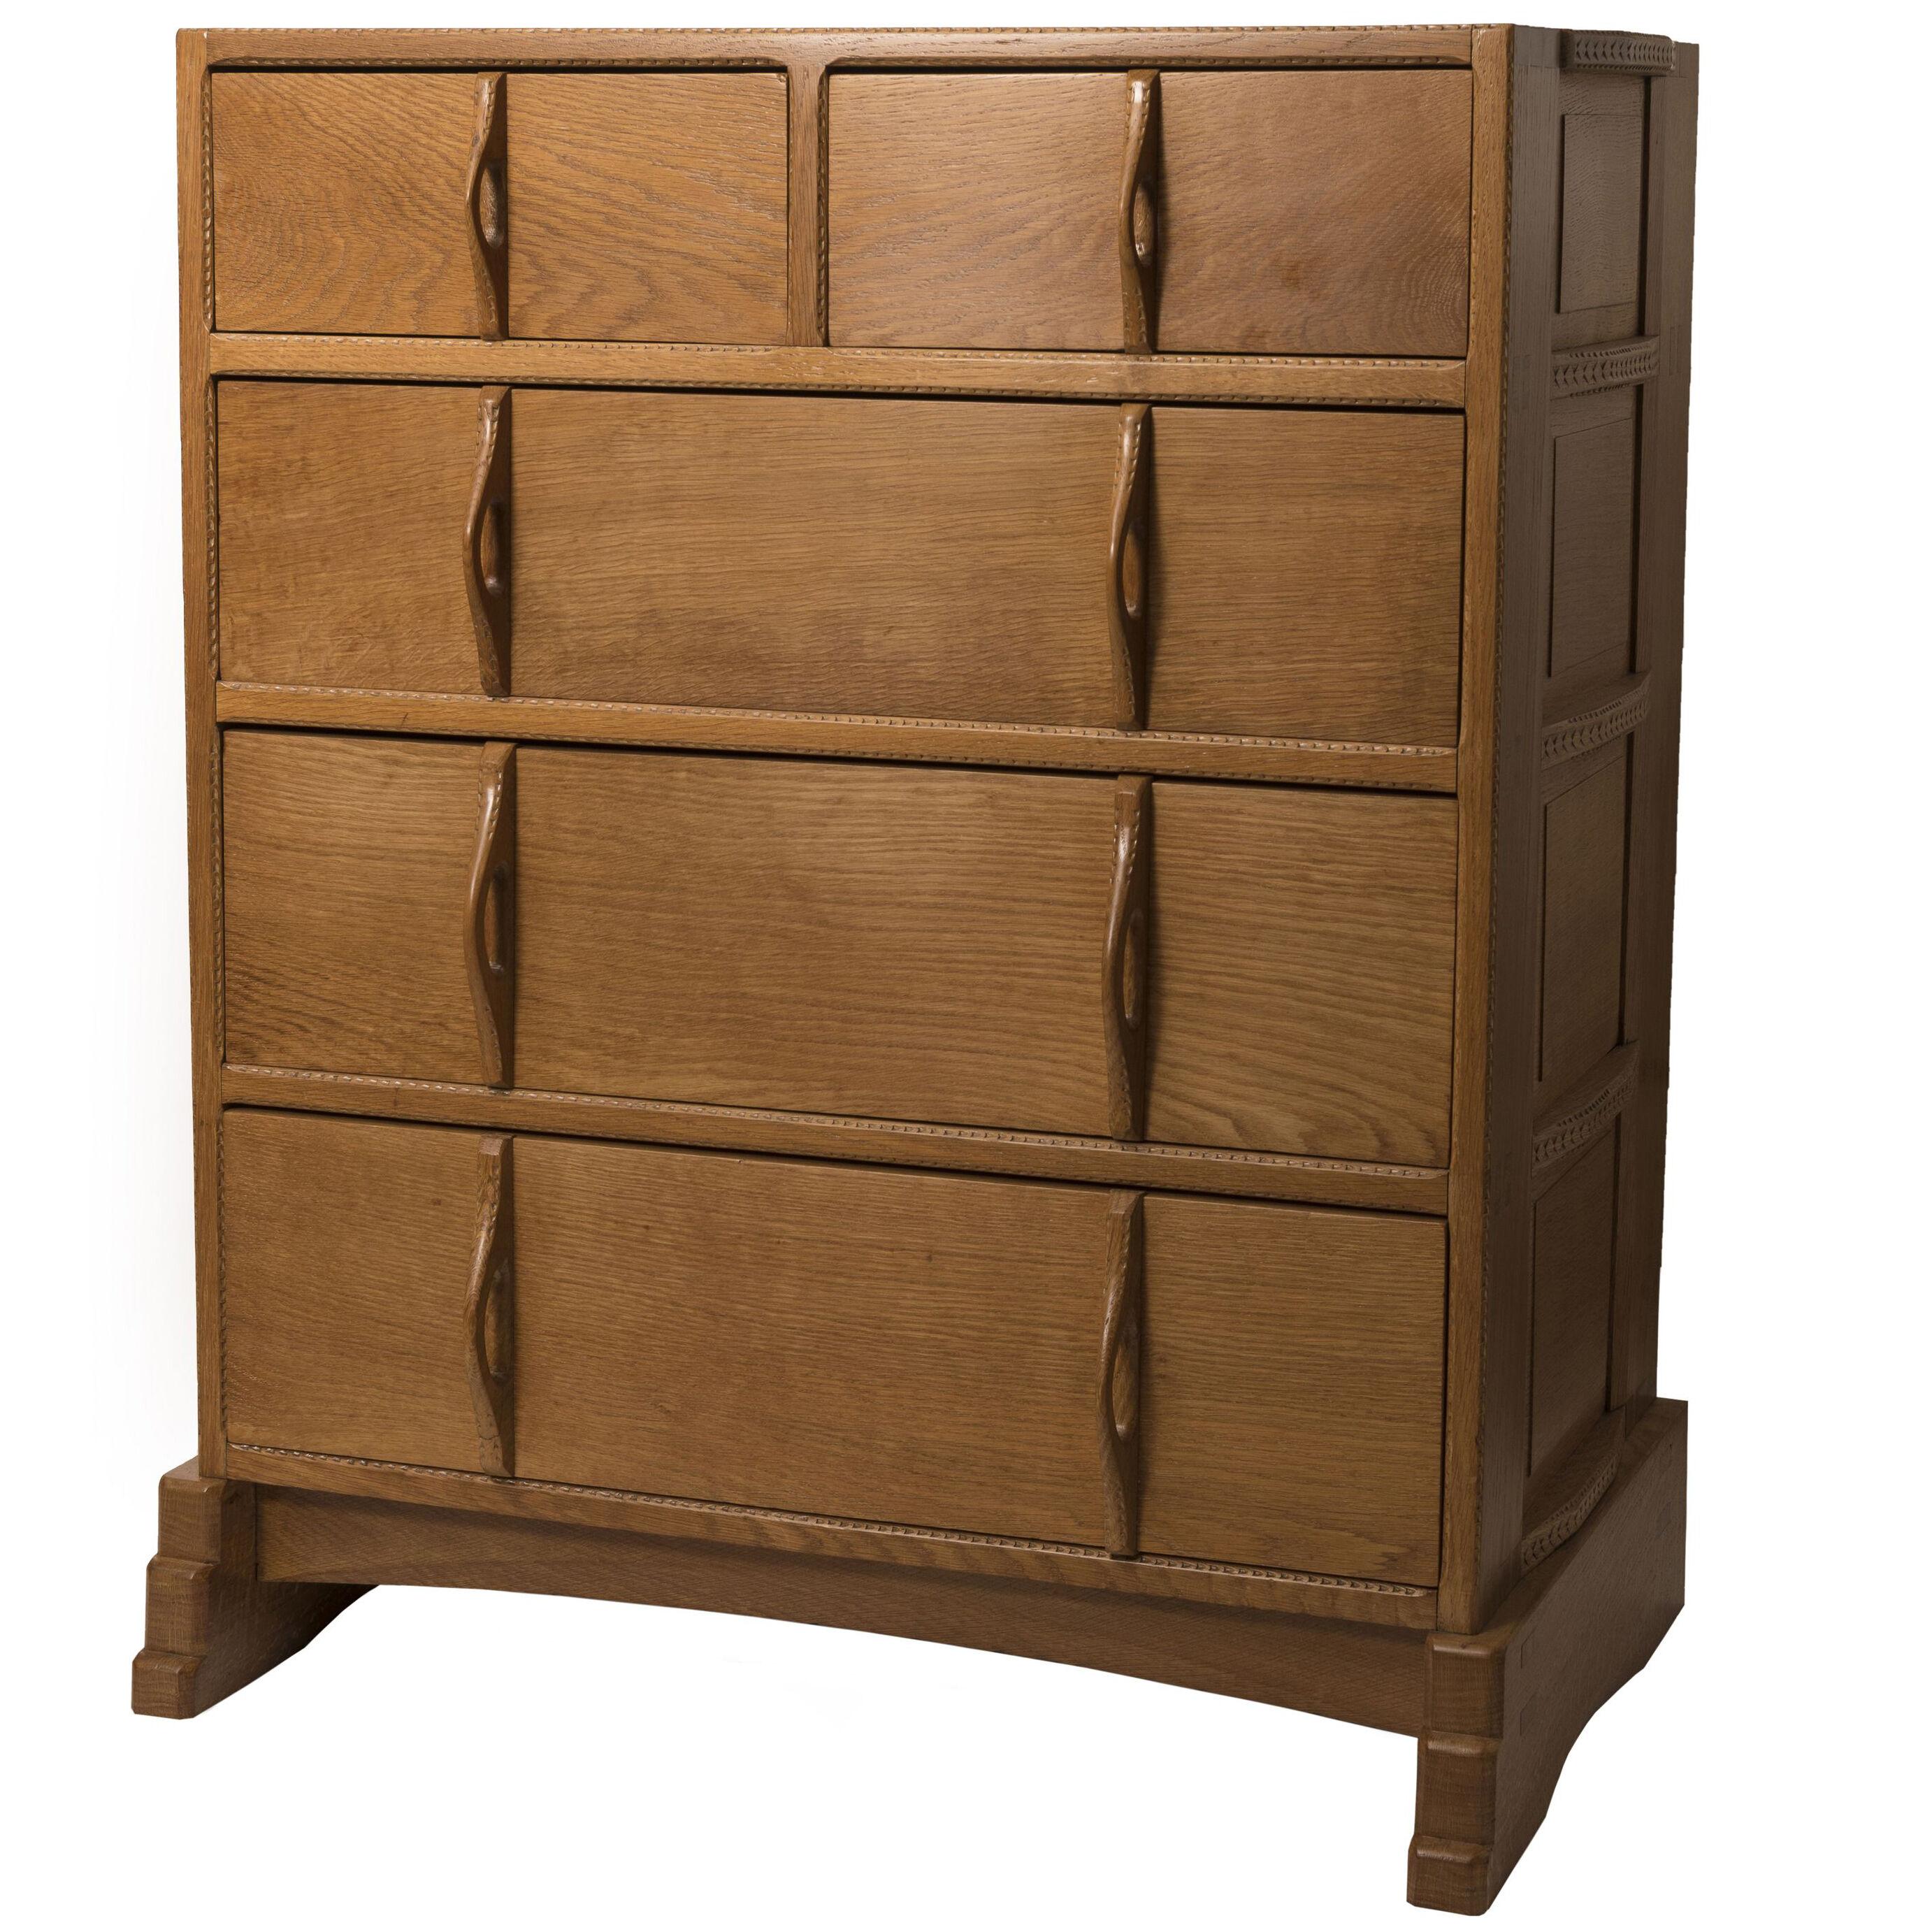 Oak chest of drawers by Sidney Barnsley, England circa 1910